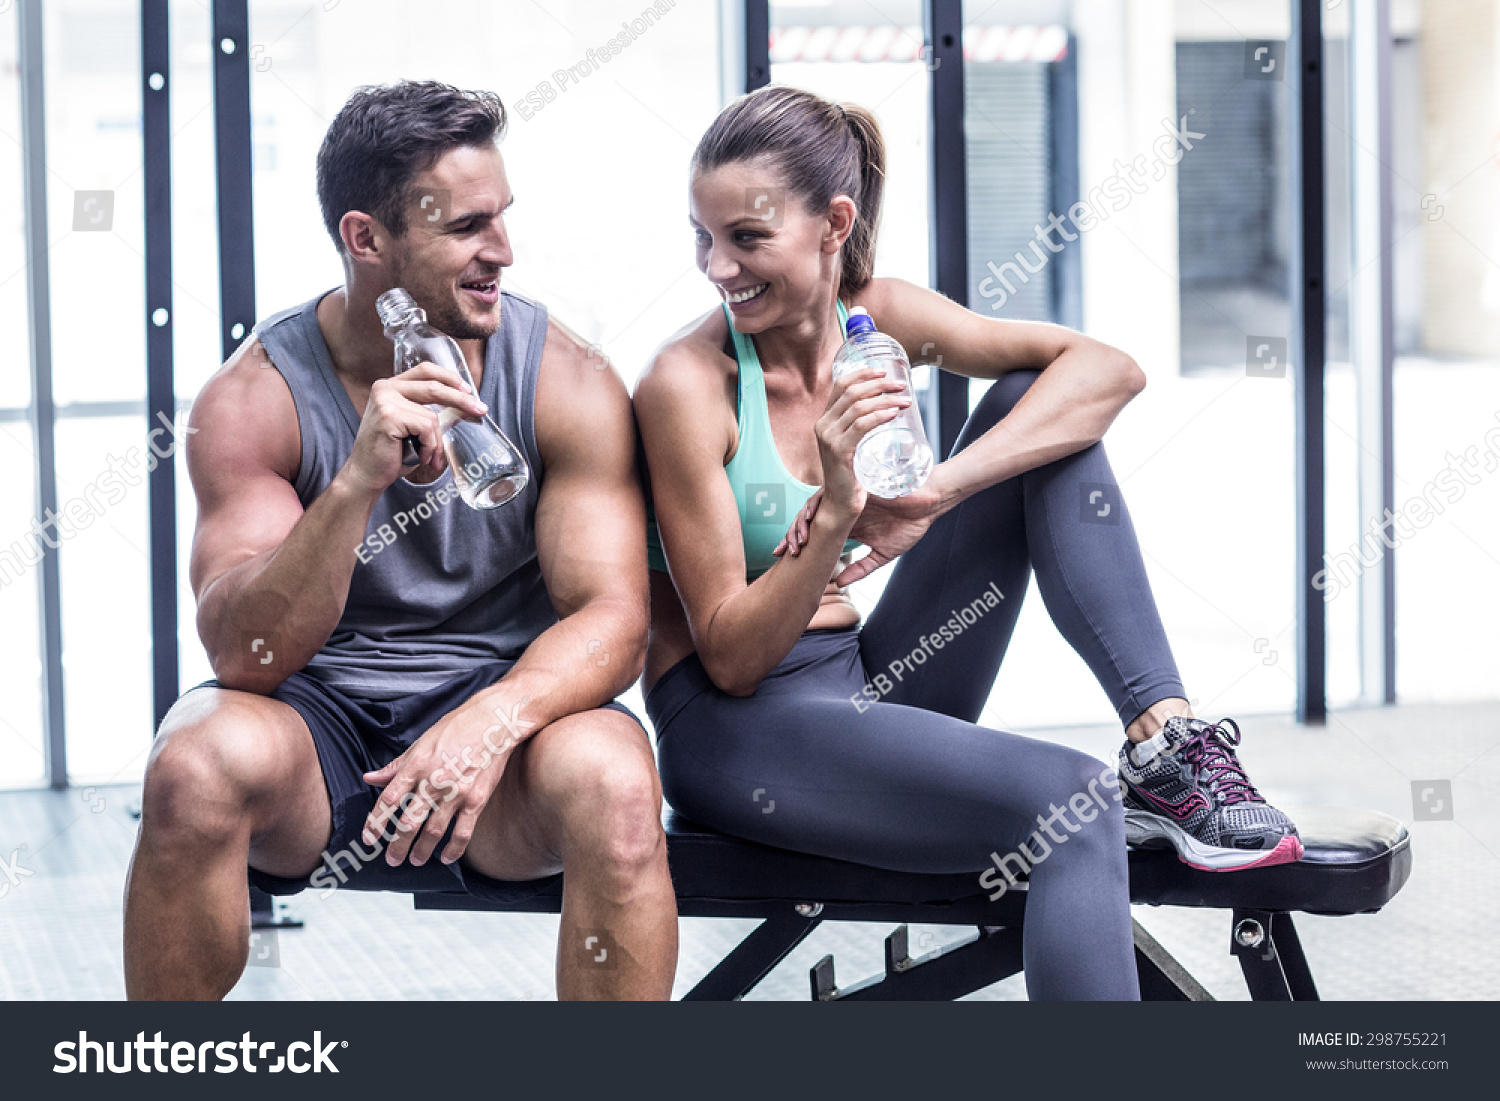 Muscular couple discussing on the bench and holding water bottle #298755221